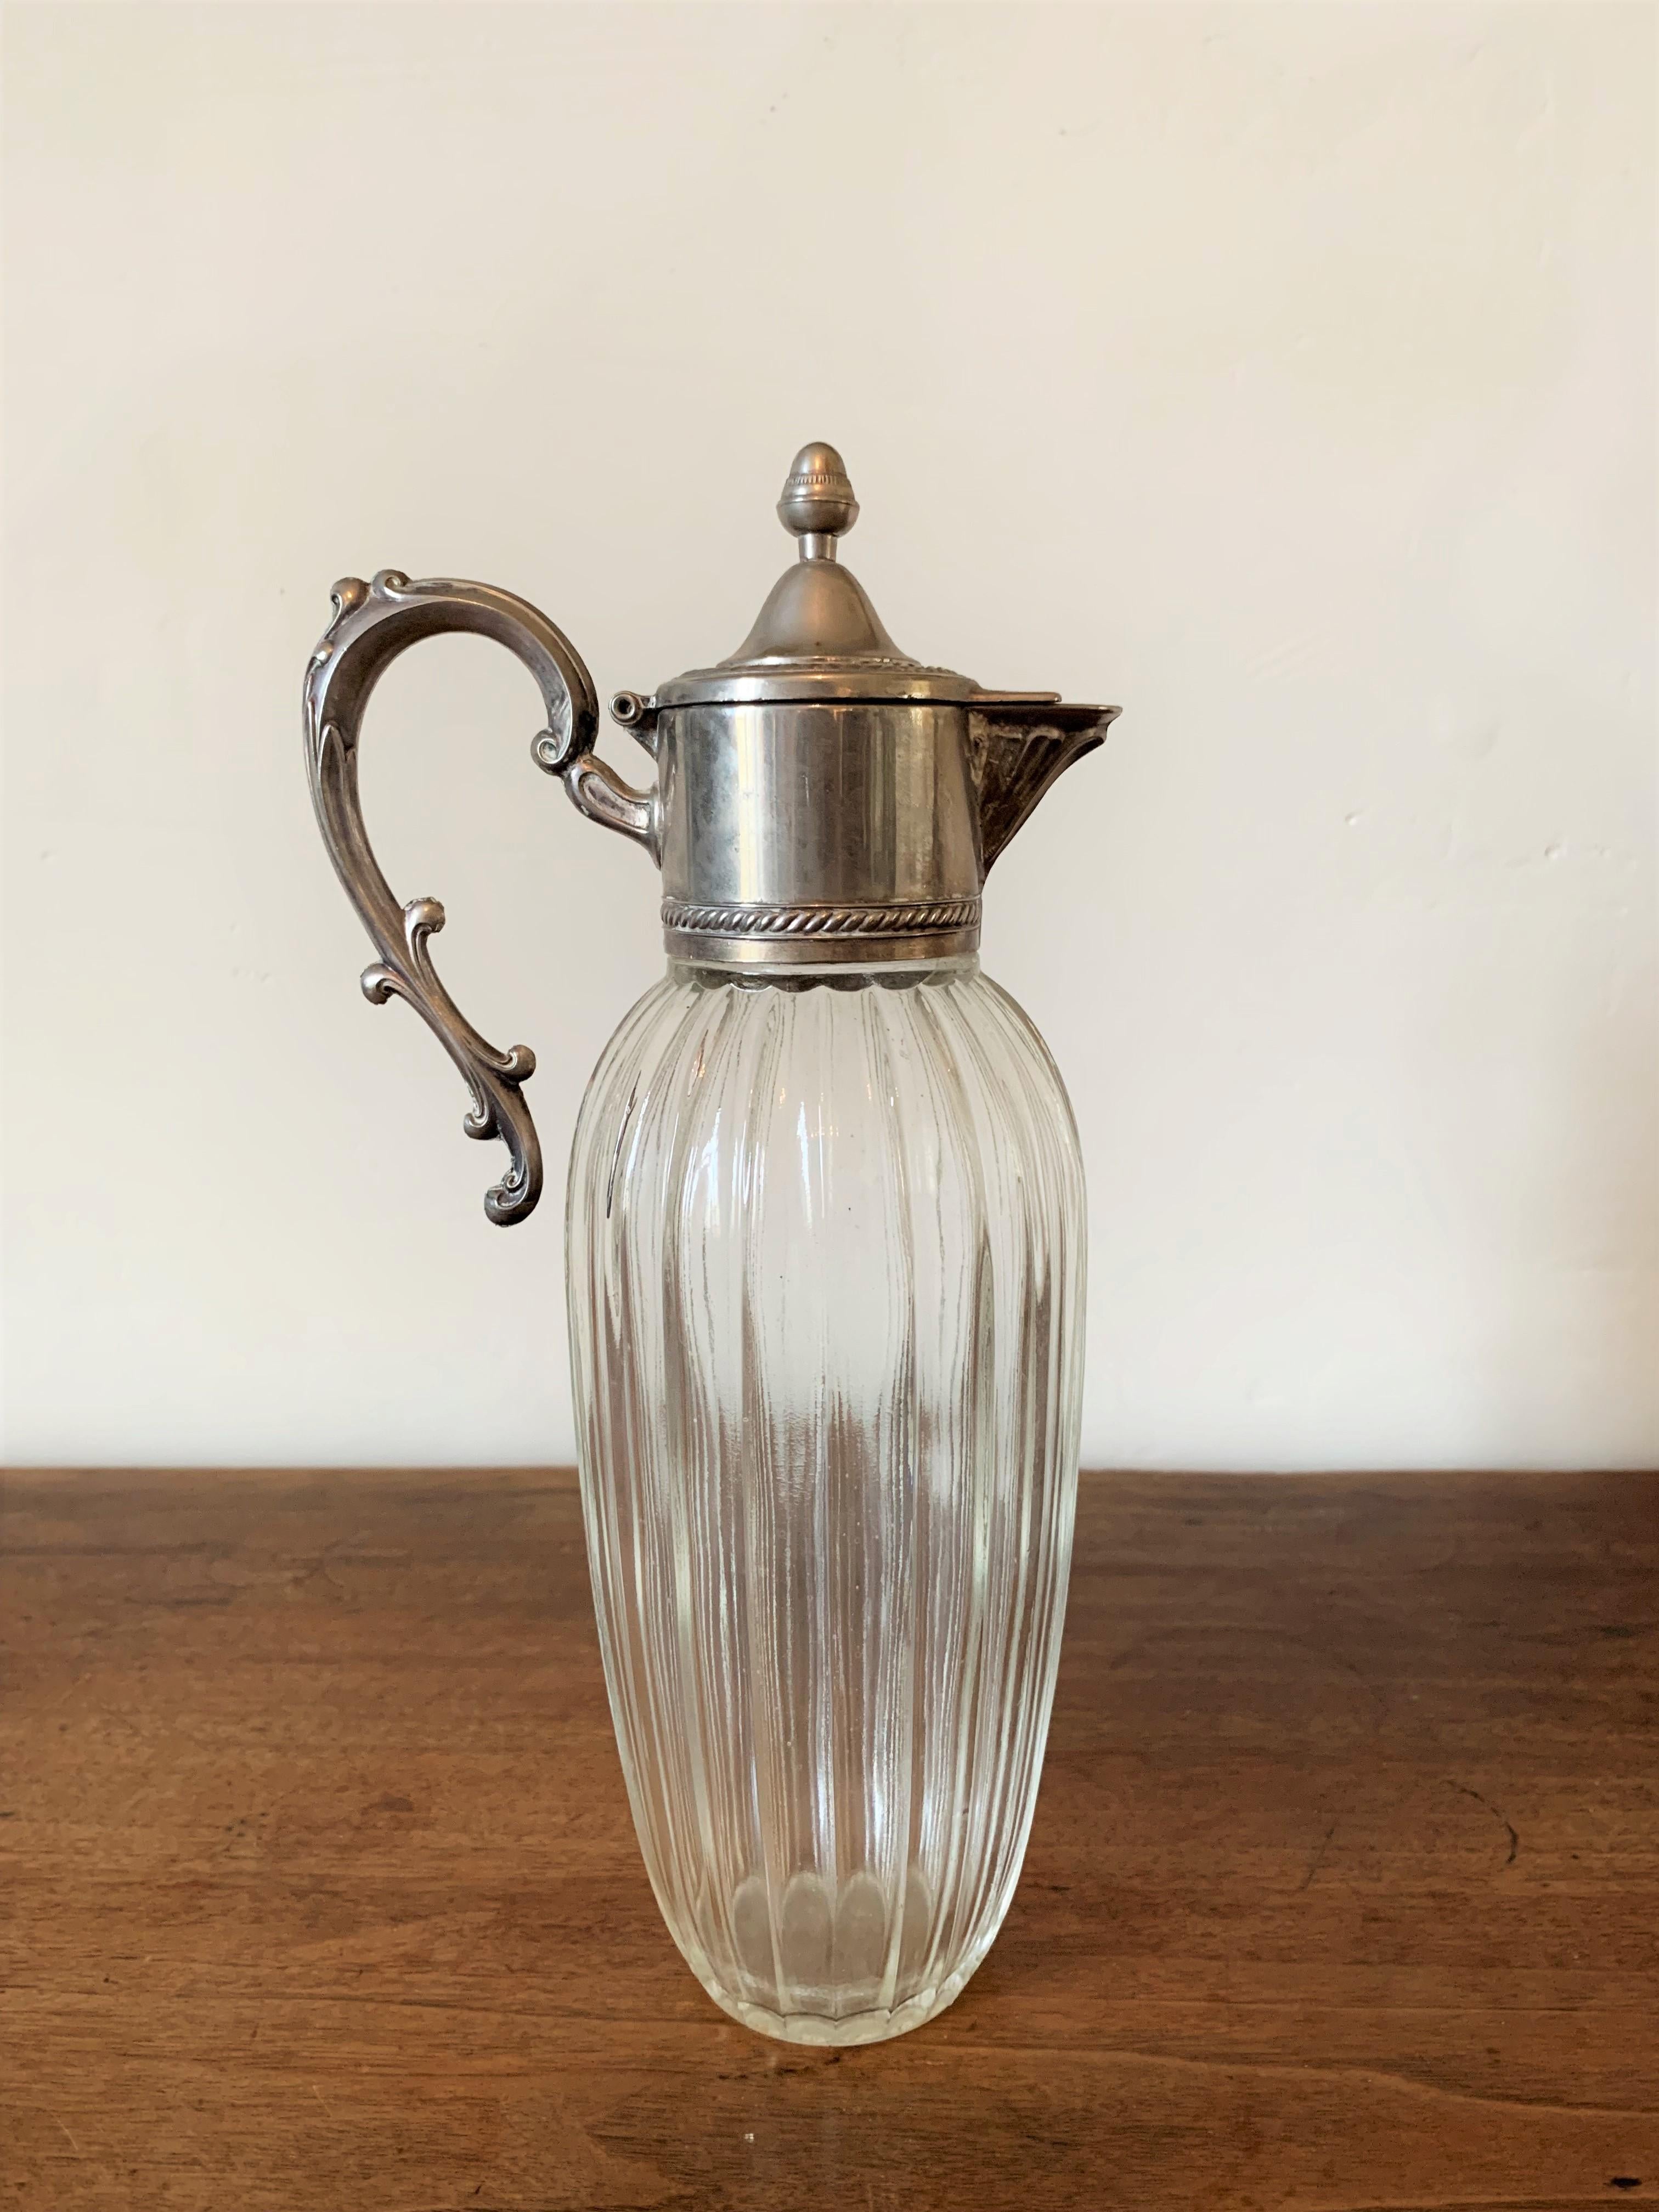 Very nice ewer, carafe from the early 20th century. The body is made of chased glass while the handle and spout are made of pewter, a very rare element and one of the oldest known at least since antiquity. The handle is graceful with a vegetal